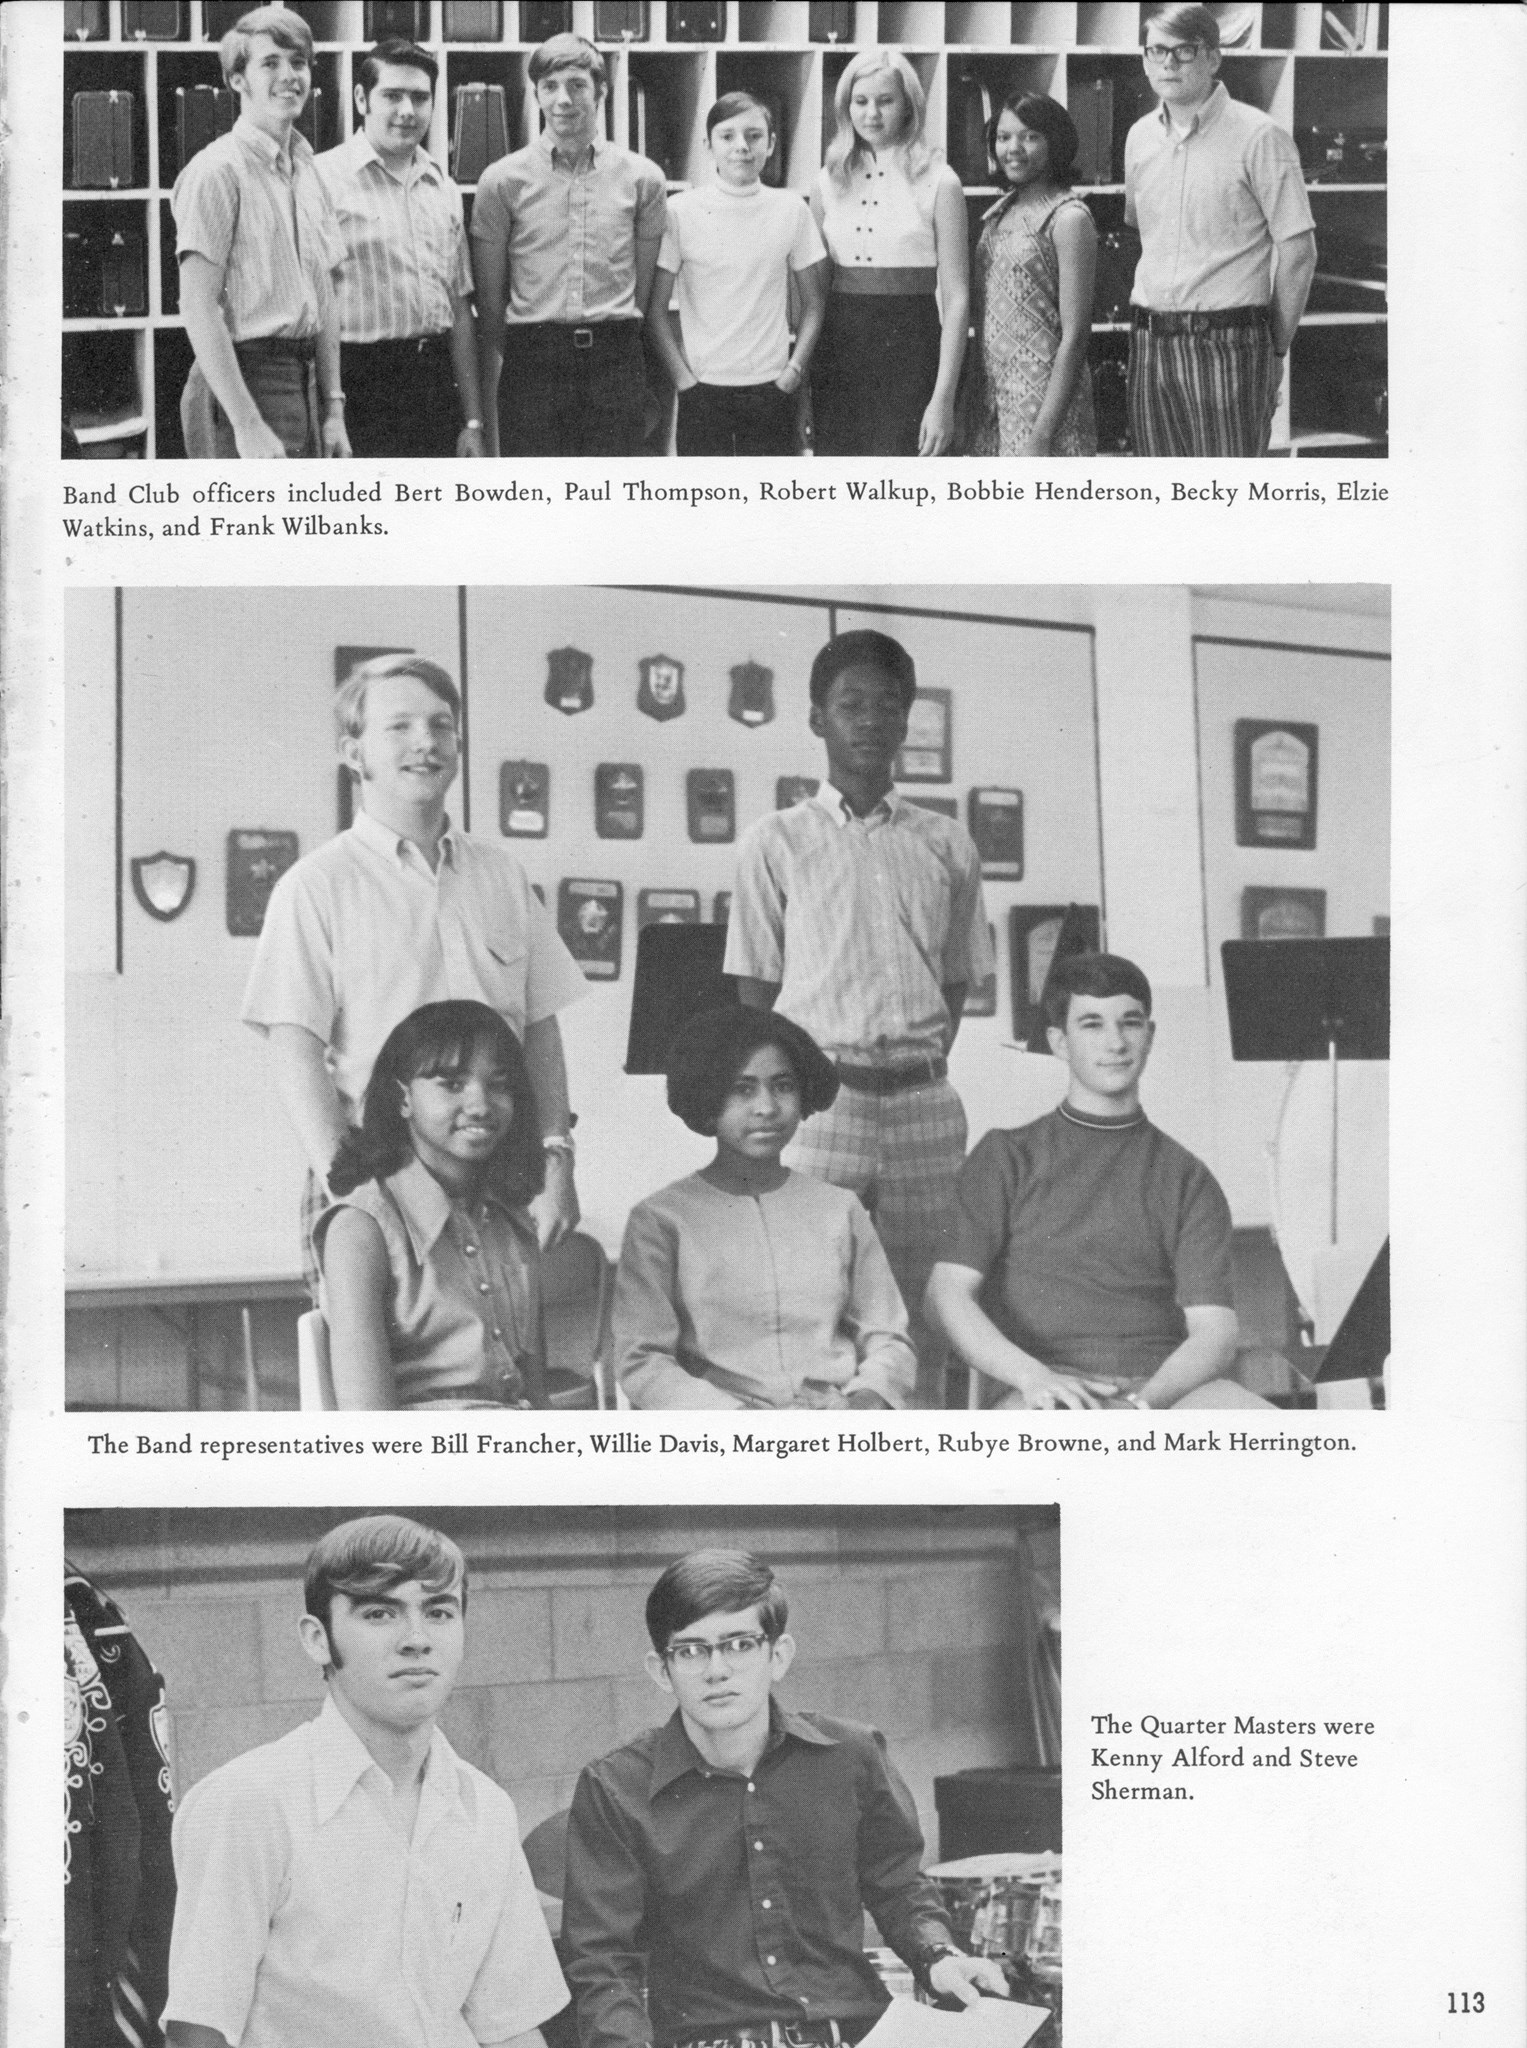 ../../../Images/Large/1971/Arclight-1971-pg0113.jpg